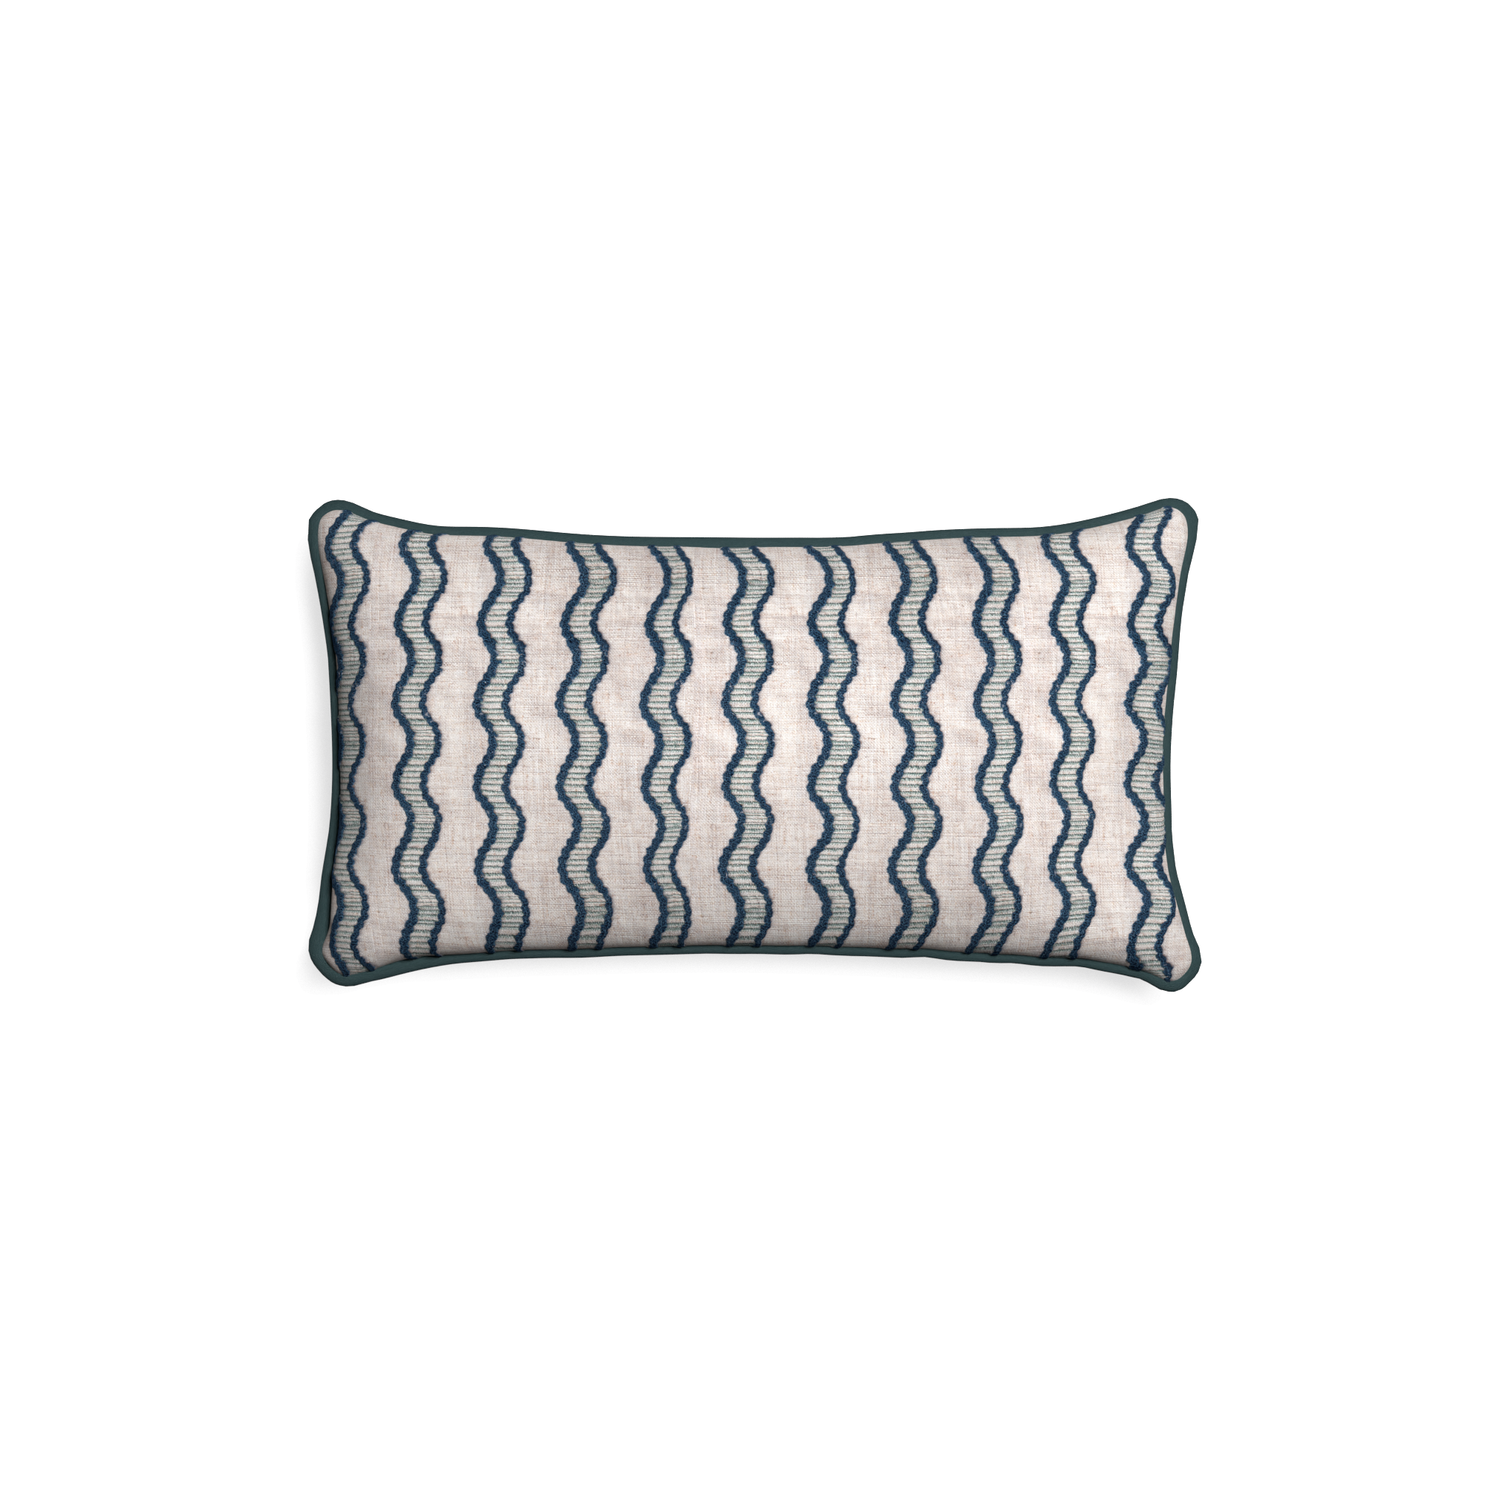 Petite-lumbar beatrice custom embroidered wavepillow with p piping on white background